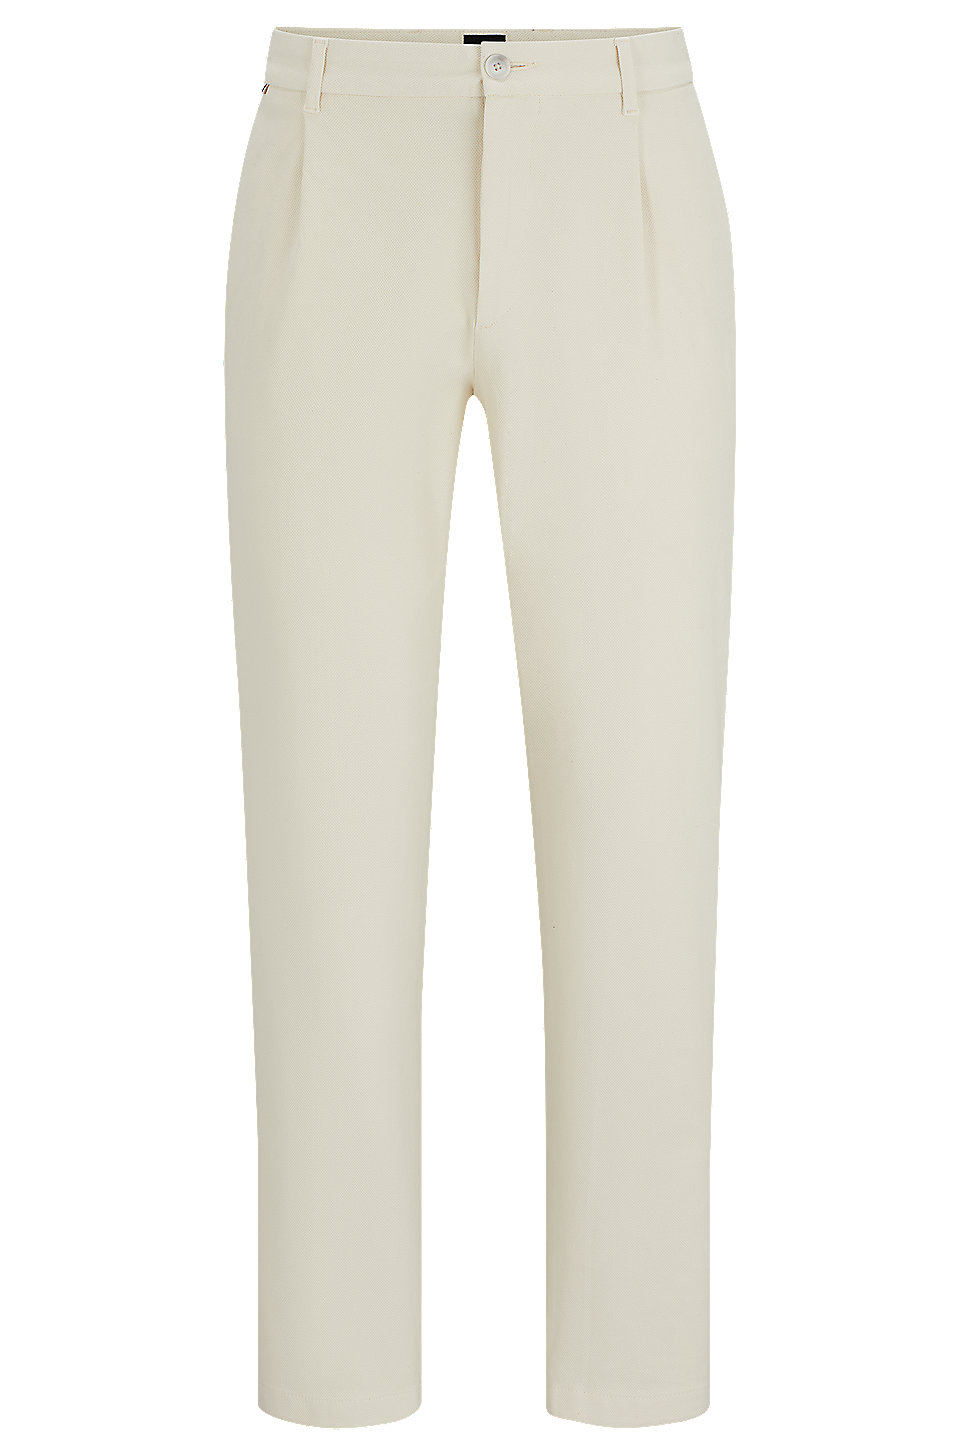 BOSS - Regular-fit trousers in structured stretch cotton